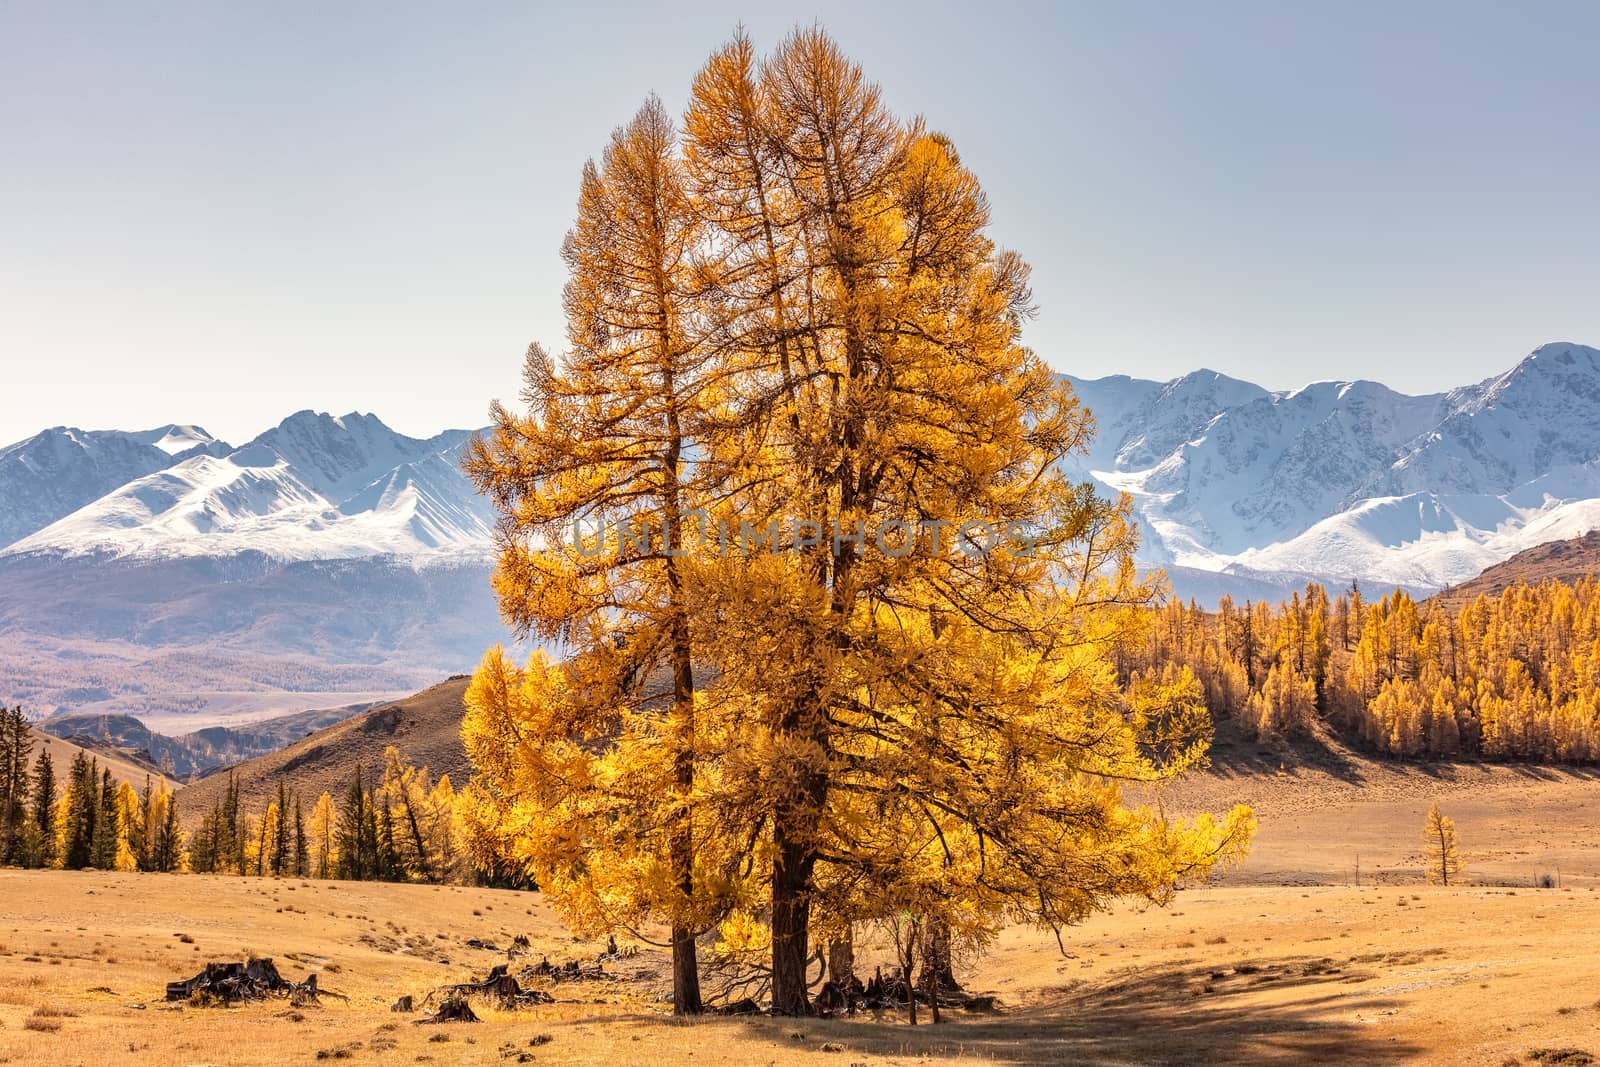 Scenic view of single tree with golden leaves standing in the field and mountains in the background. Altai mountains, Russia. Fall 2019